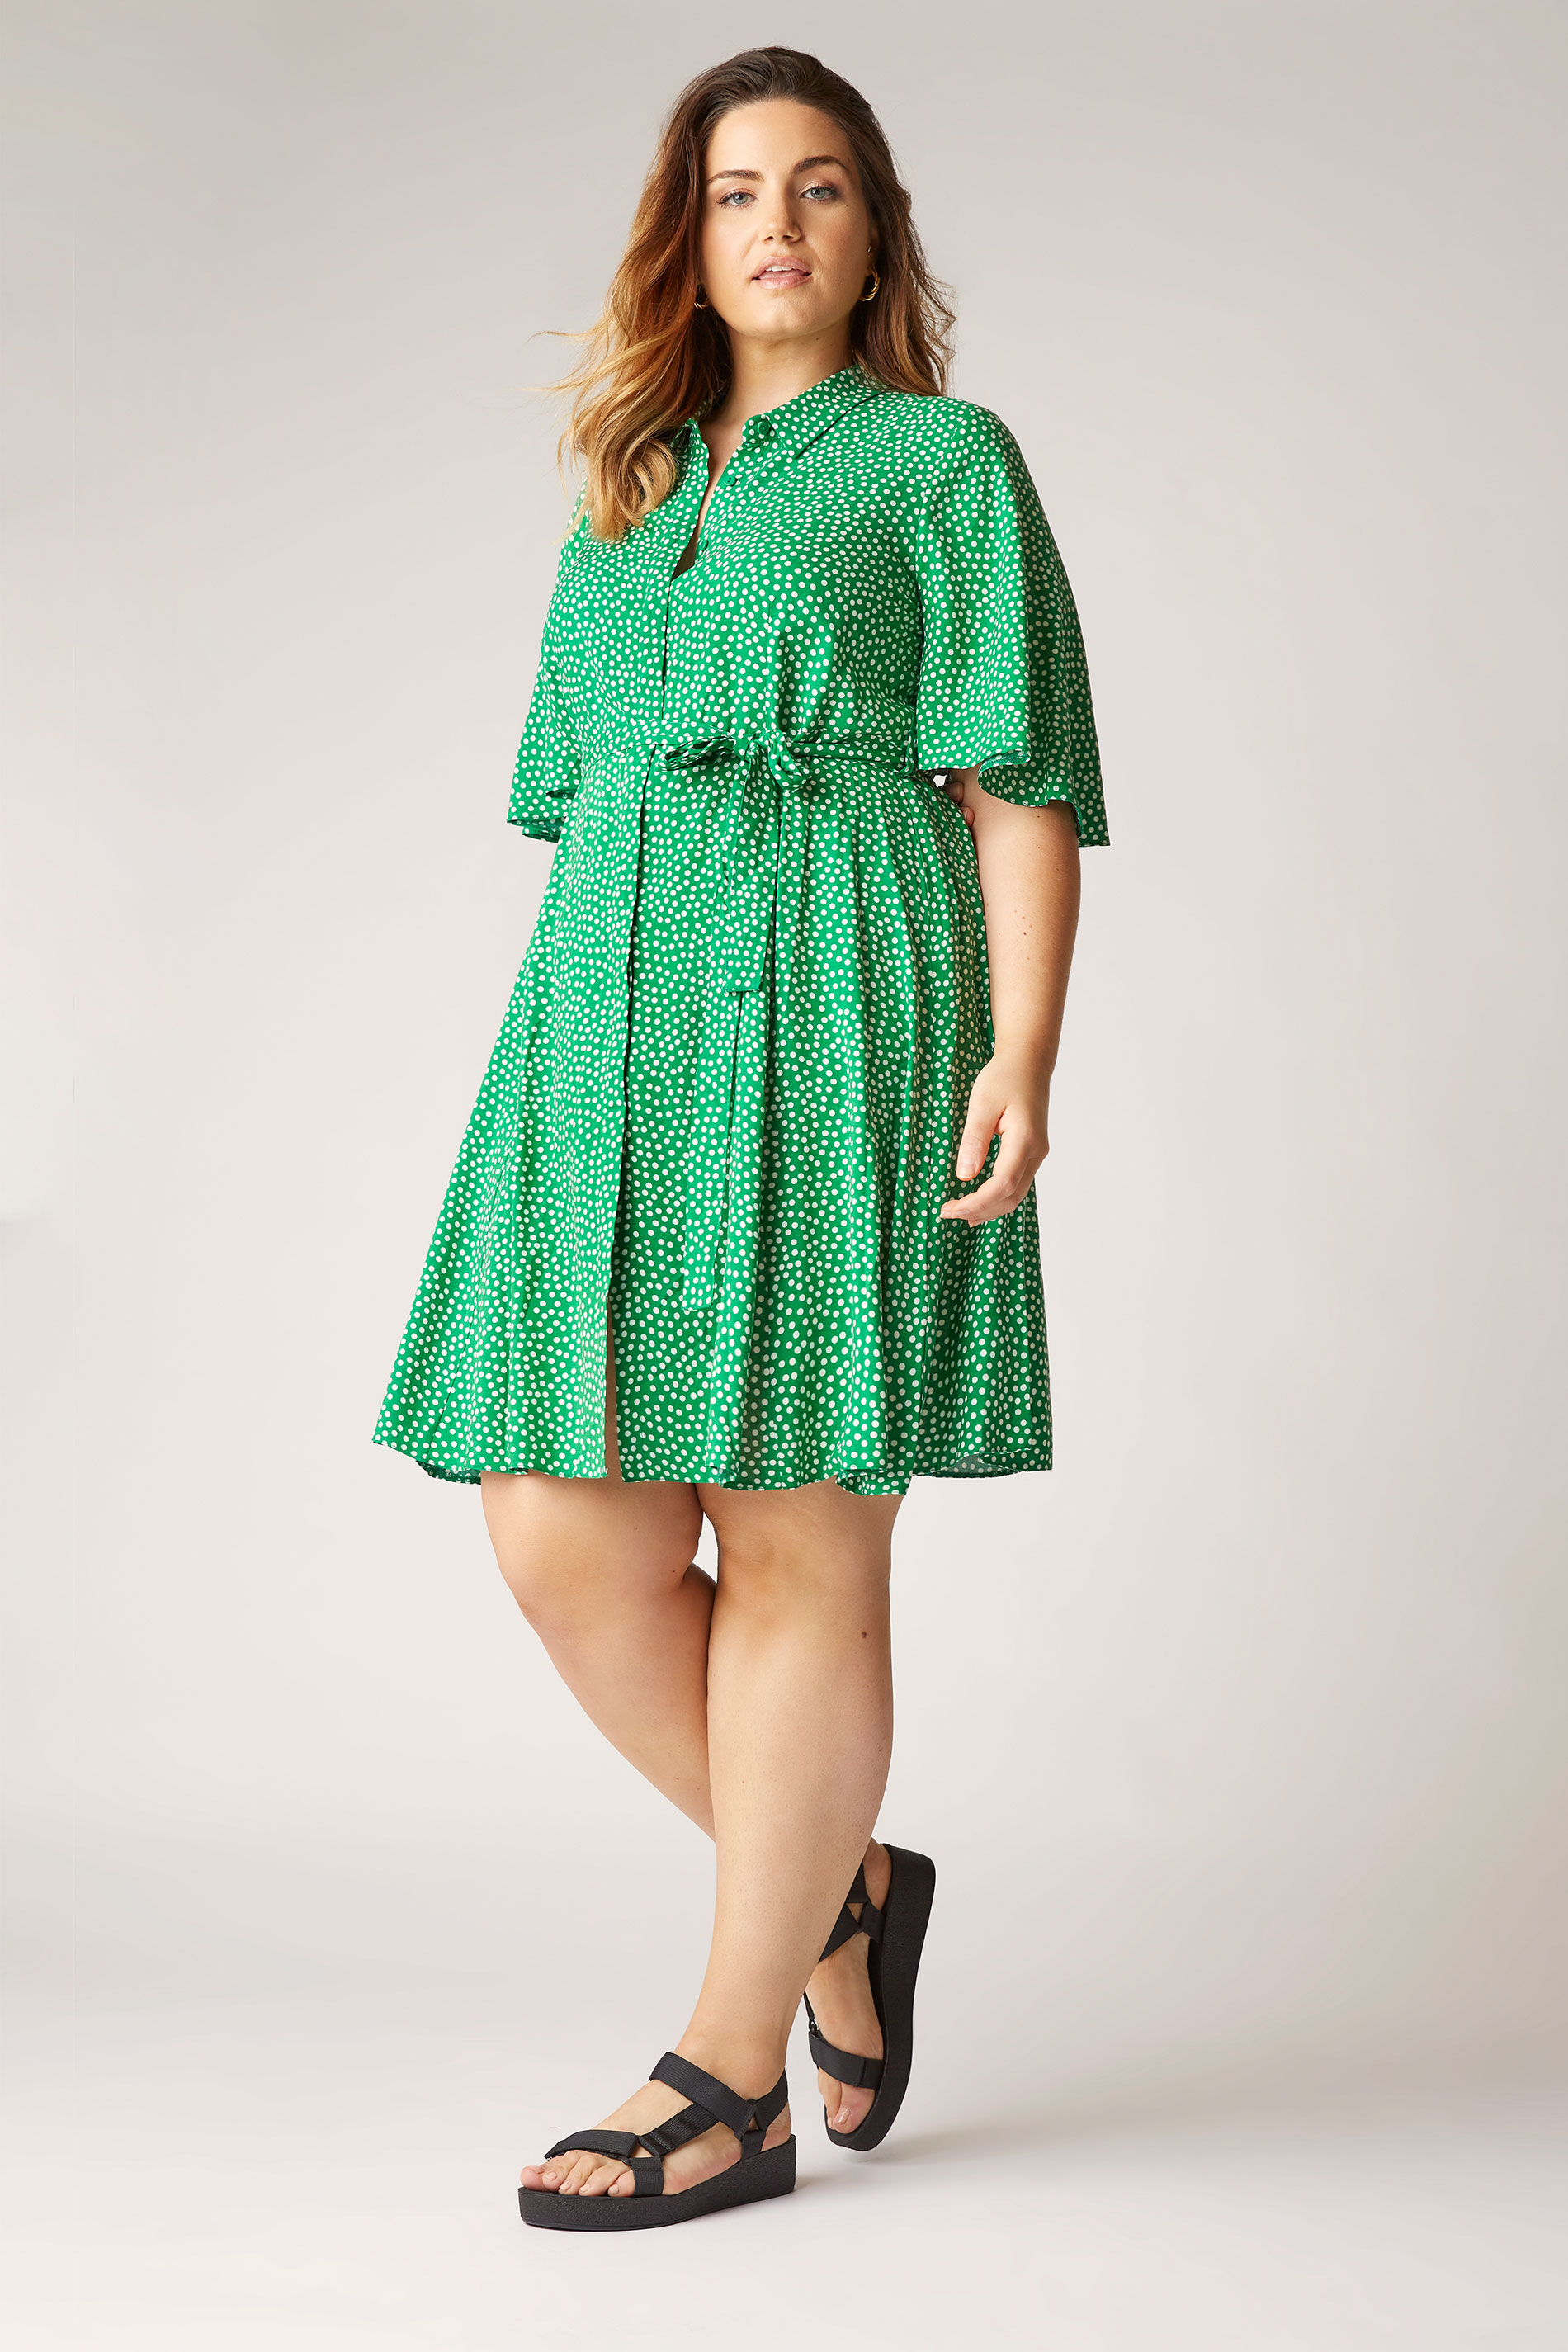 Plus Size The Limited Edit Green Polka Dot Shirt Mini Dress Yours Clothing 